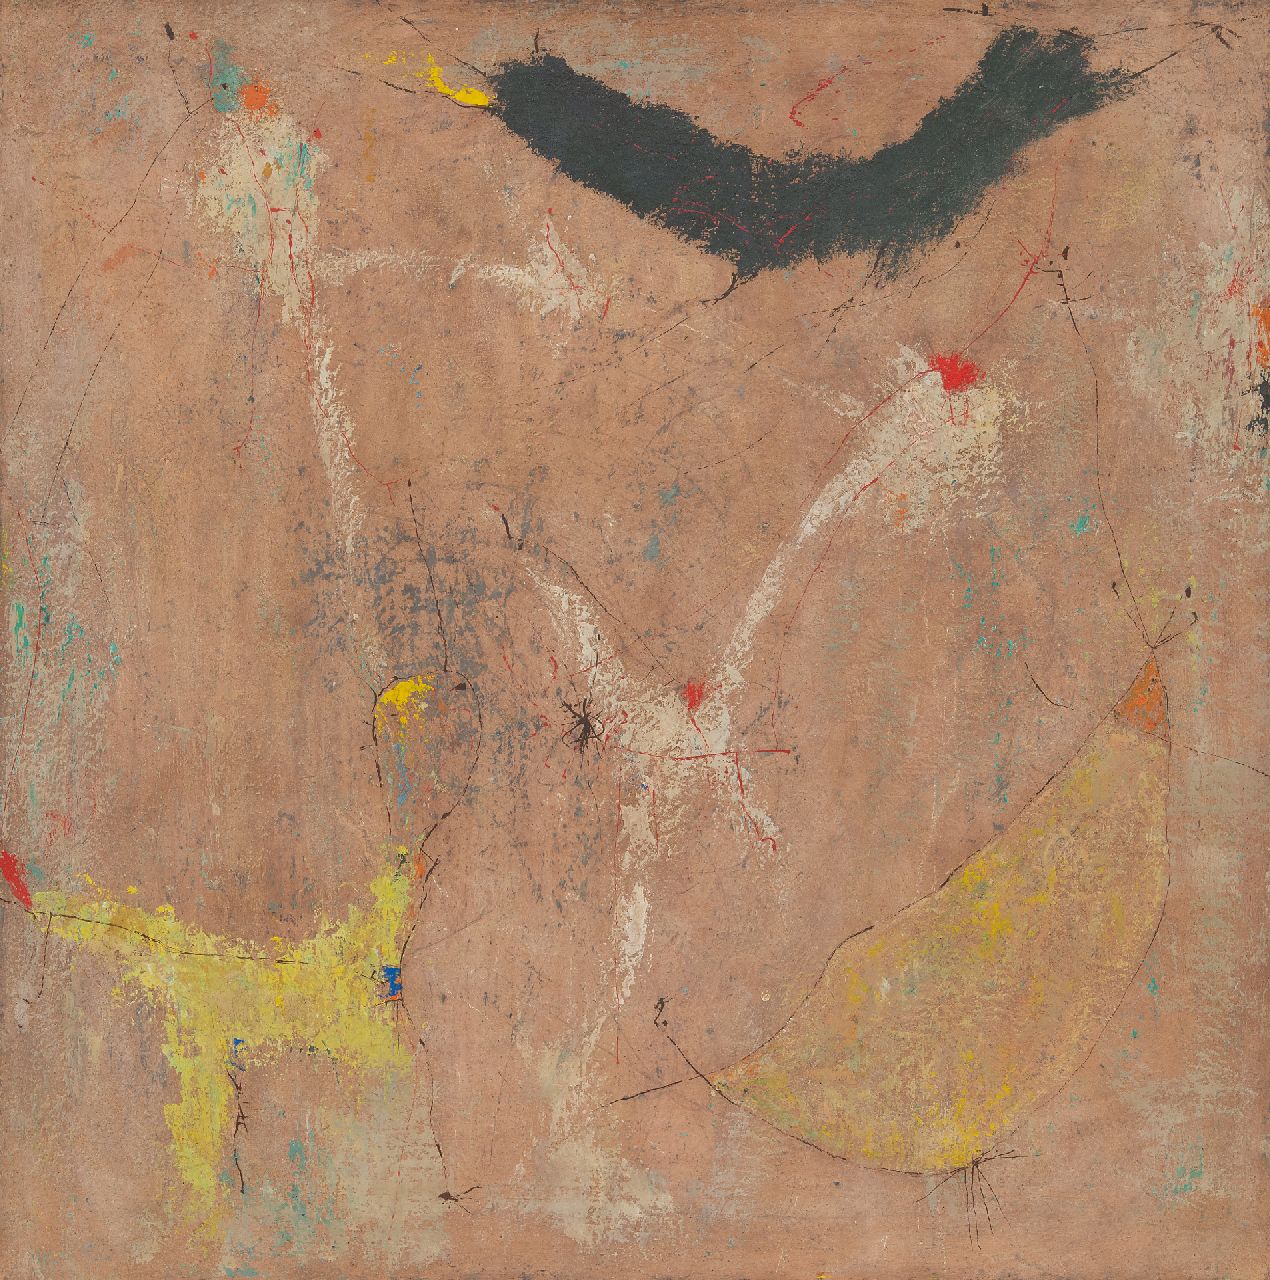 Haan W.J. de | Willem Jacob 'Wim' de Haan, Untitled, oil on canvas 70.1 x 70.3 cm, signed on the stretcher and dated on the stretcher '56